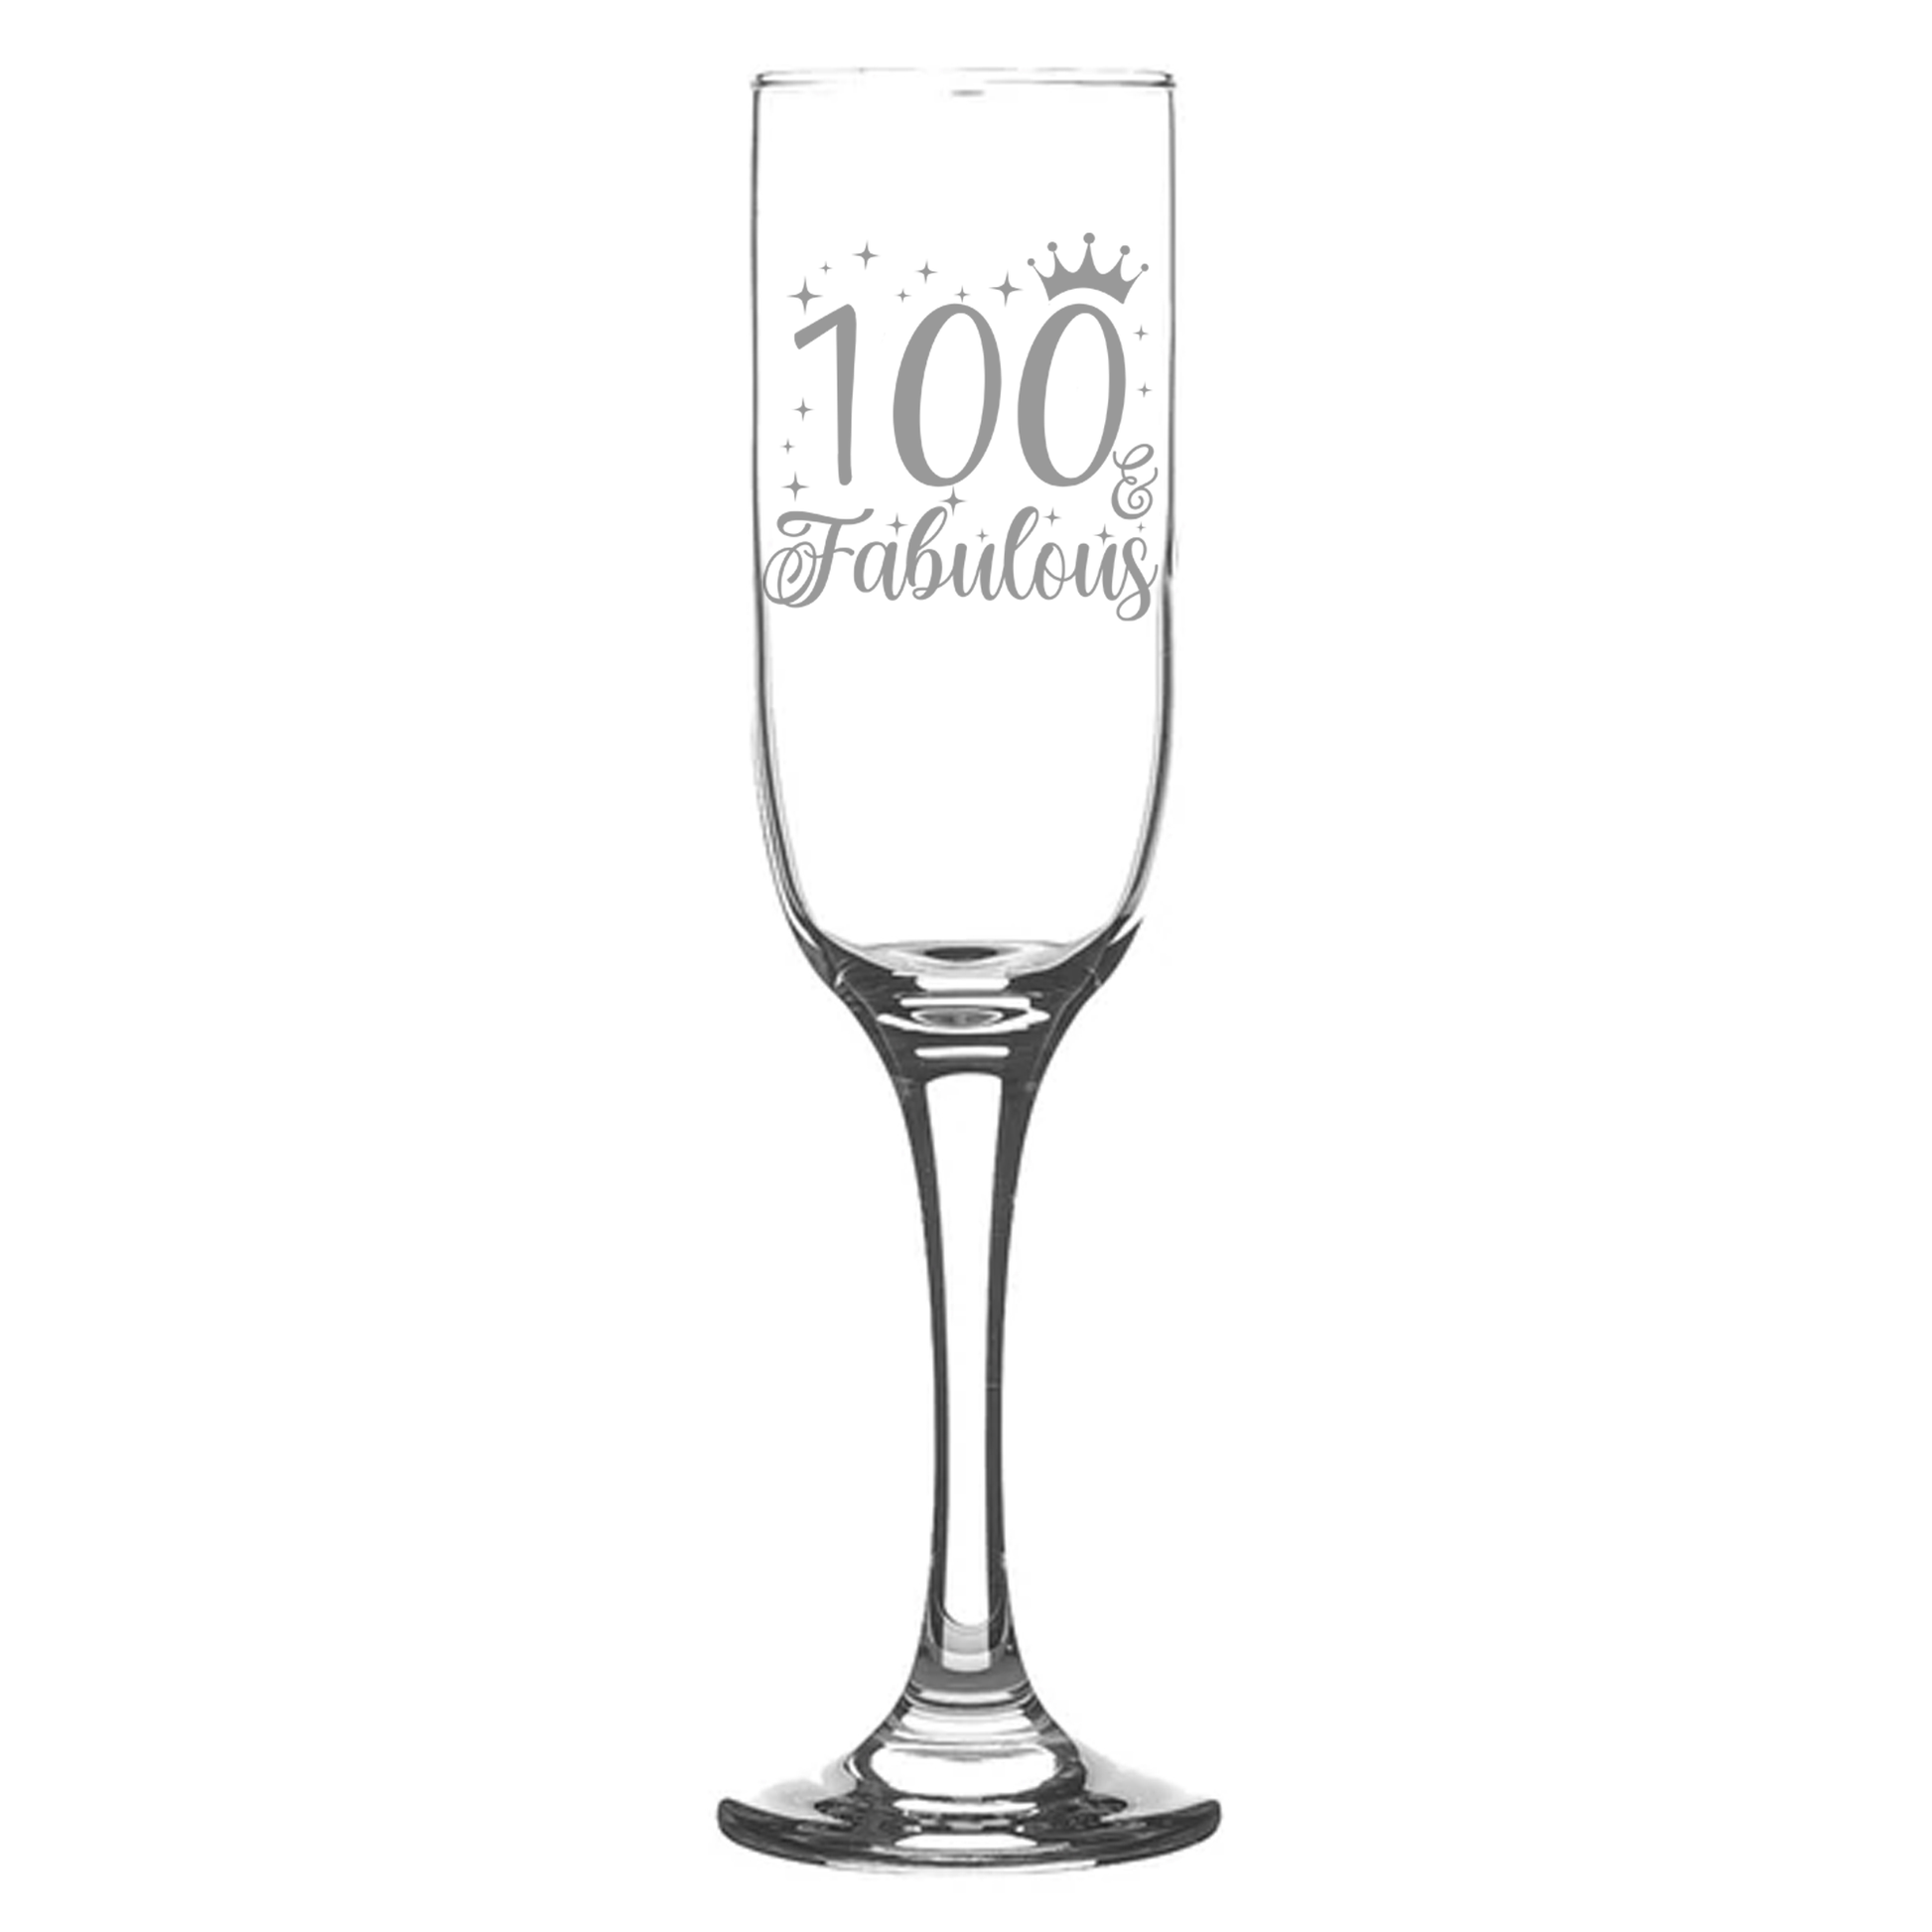 100 & Fabulous Engraved Champagne Glass and/or Coaster Set  - Always Looking Good - Champagne Glass On Its Own  